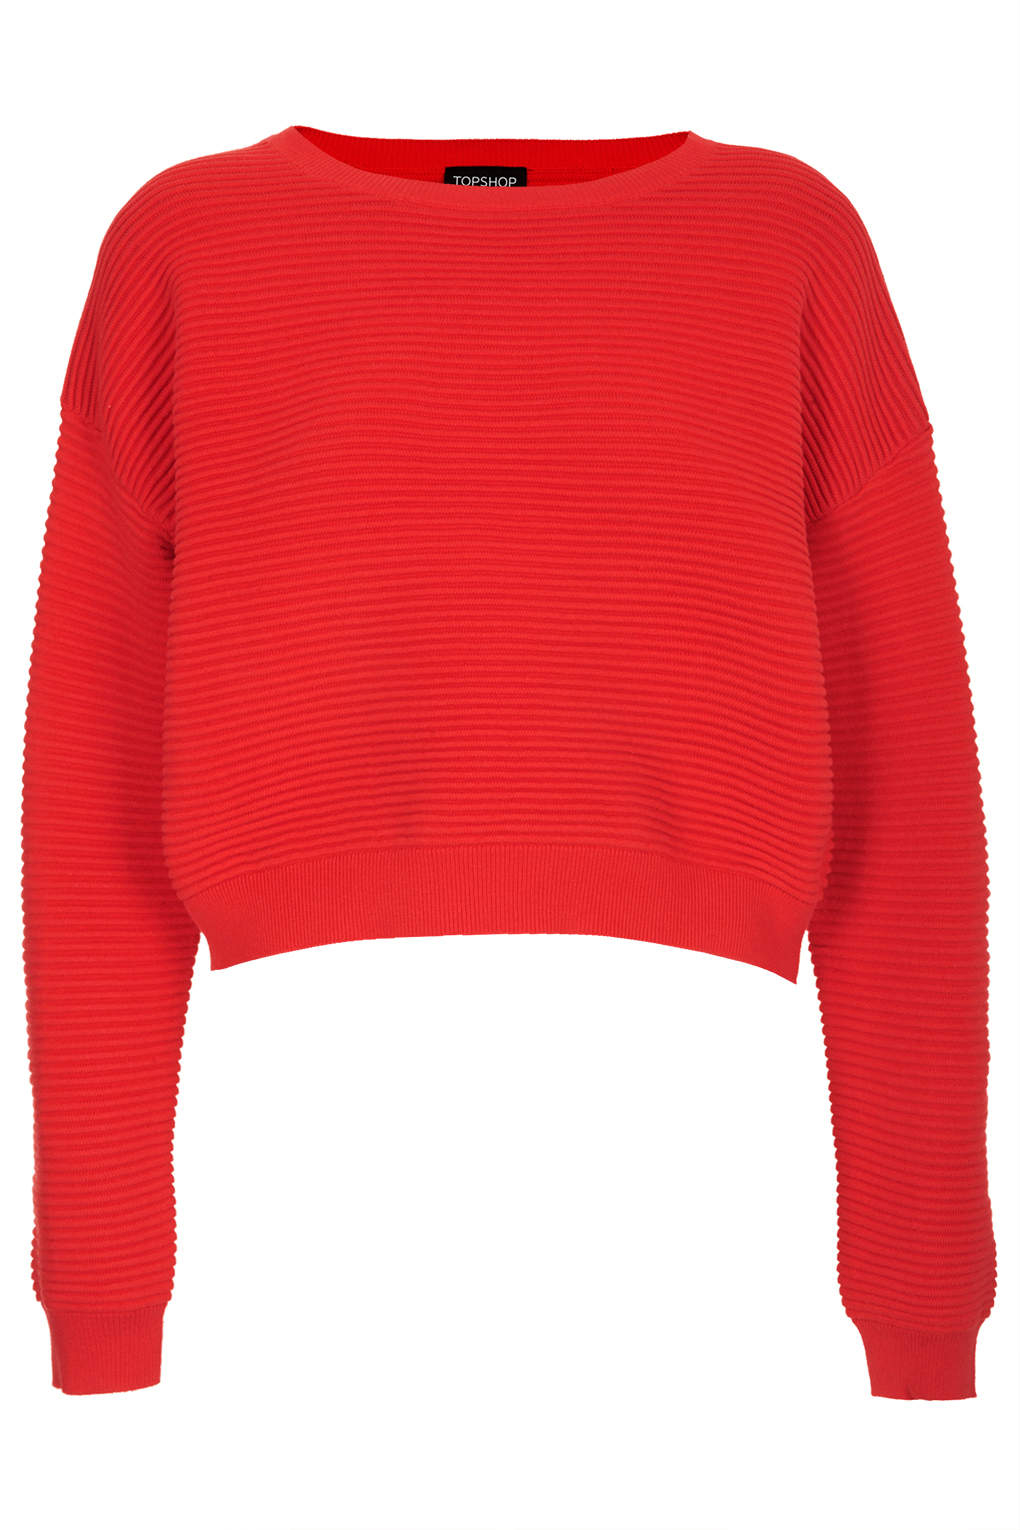 Lyst - Topshop Knitted Rib Textured Jumper in Red